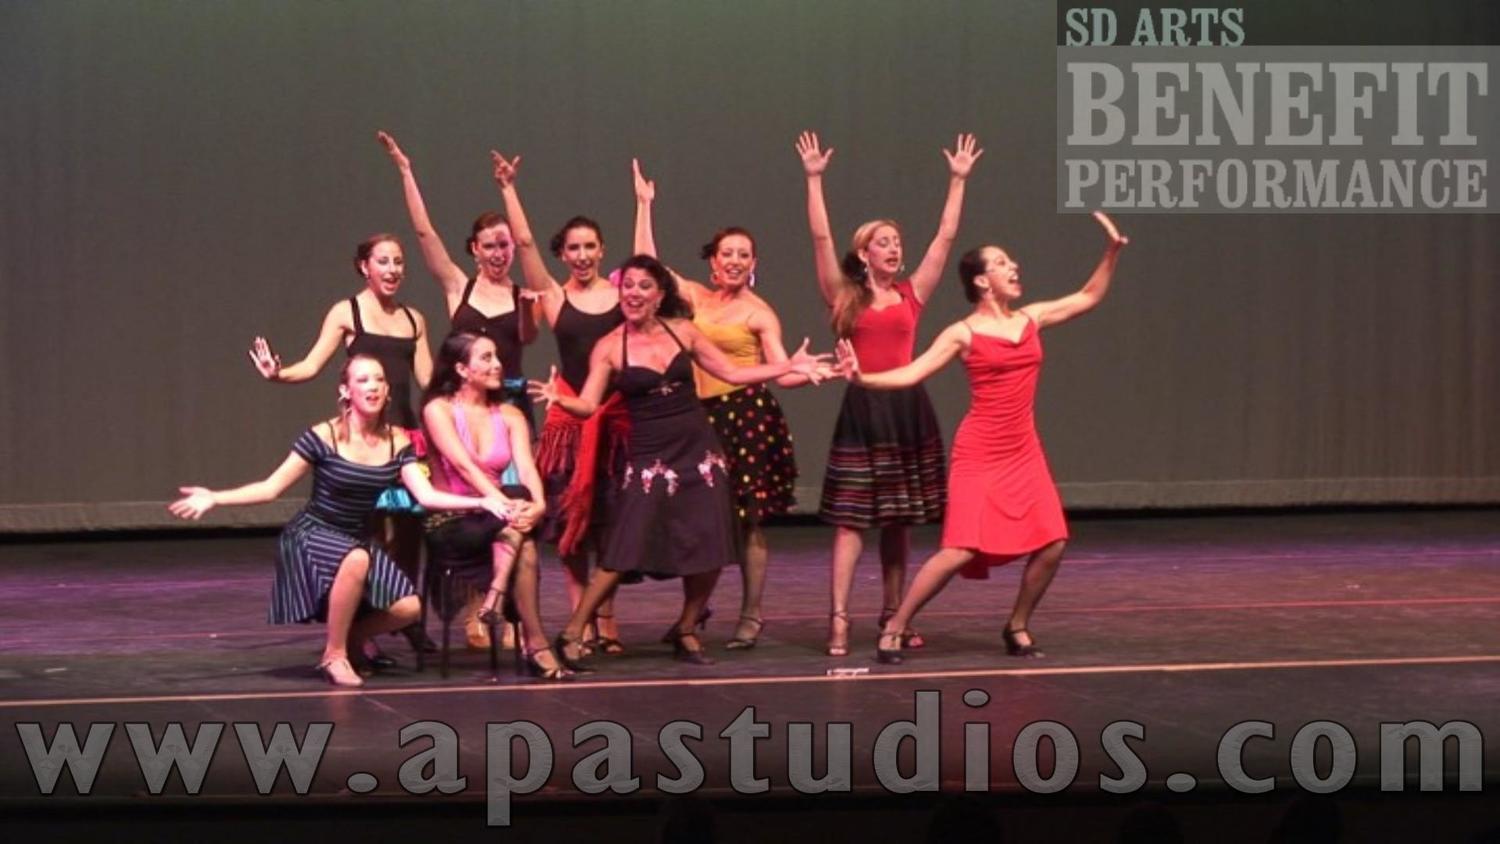 SD ARTS Benefit Performance featuring Broadway's Roxane Carrasco as Anita in WEST SIDE STORY 1